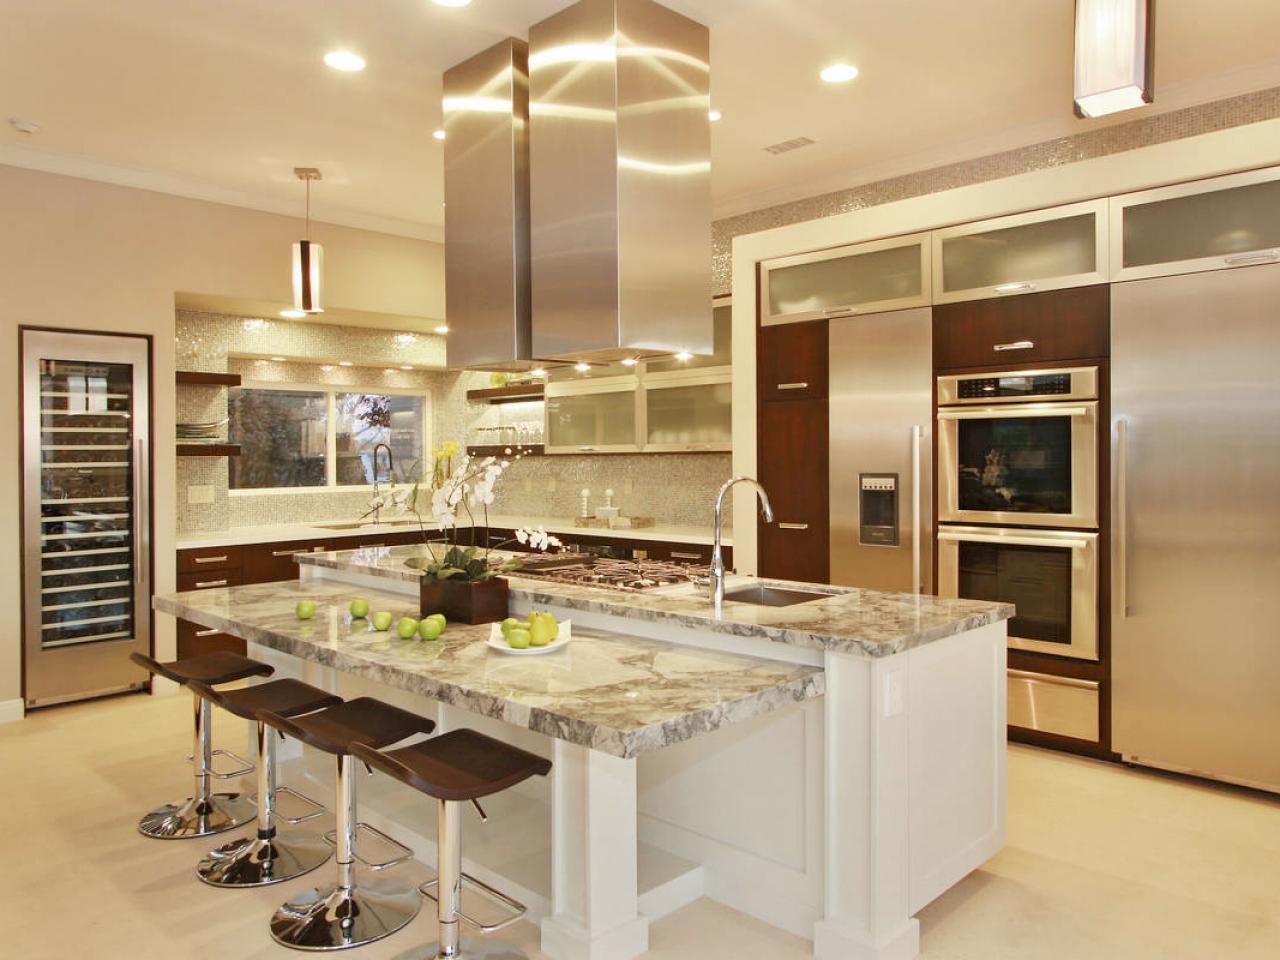 universal design in kitchen this kitchen s l shaped layout makes it 